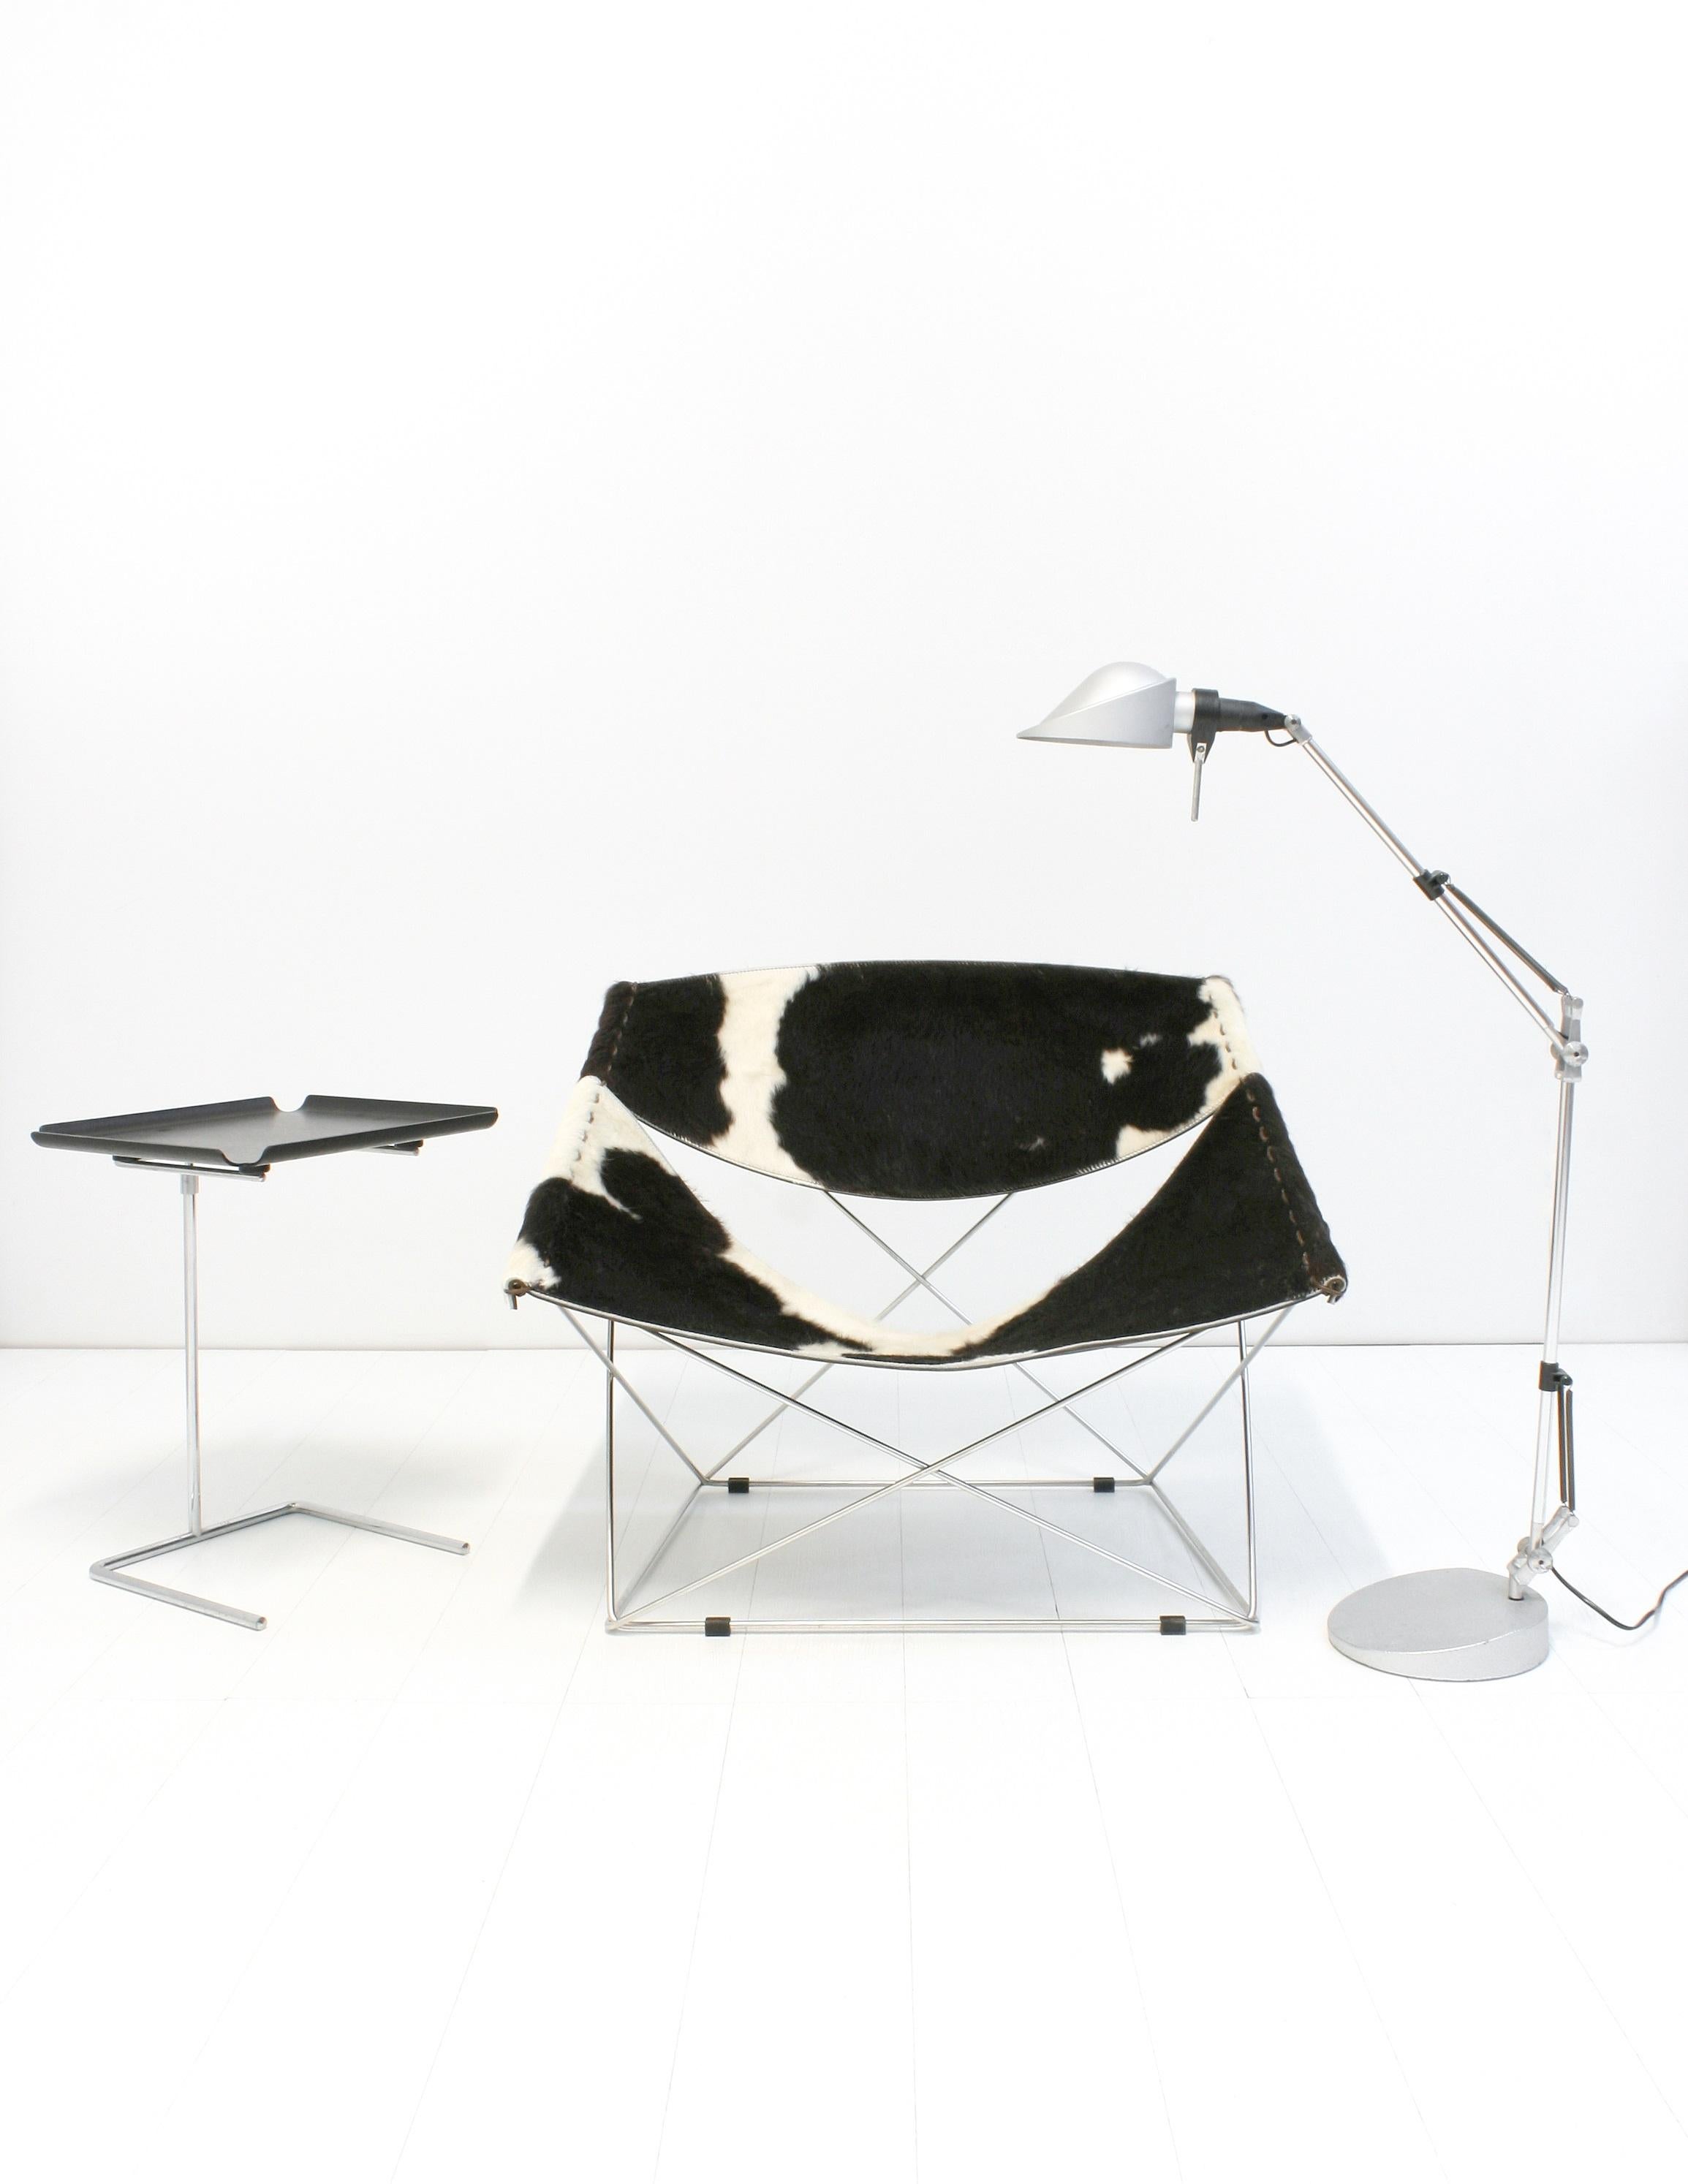 The F675 als known as the Butterfly Chair was designed by Pierre Paulin in 1963 and manufactured by Artifort, Holland.
This chair with elegant lines is edited with the original cow skin upholstery. The frame is made of high quality metal and has a